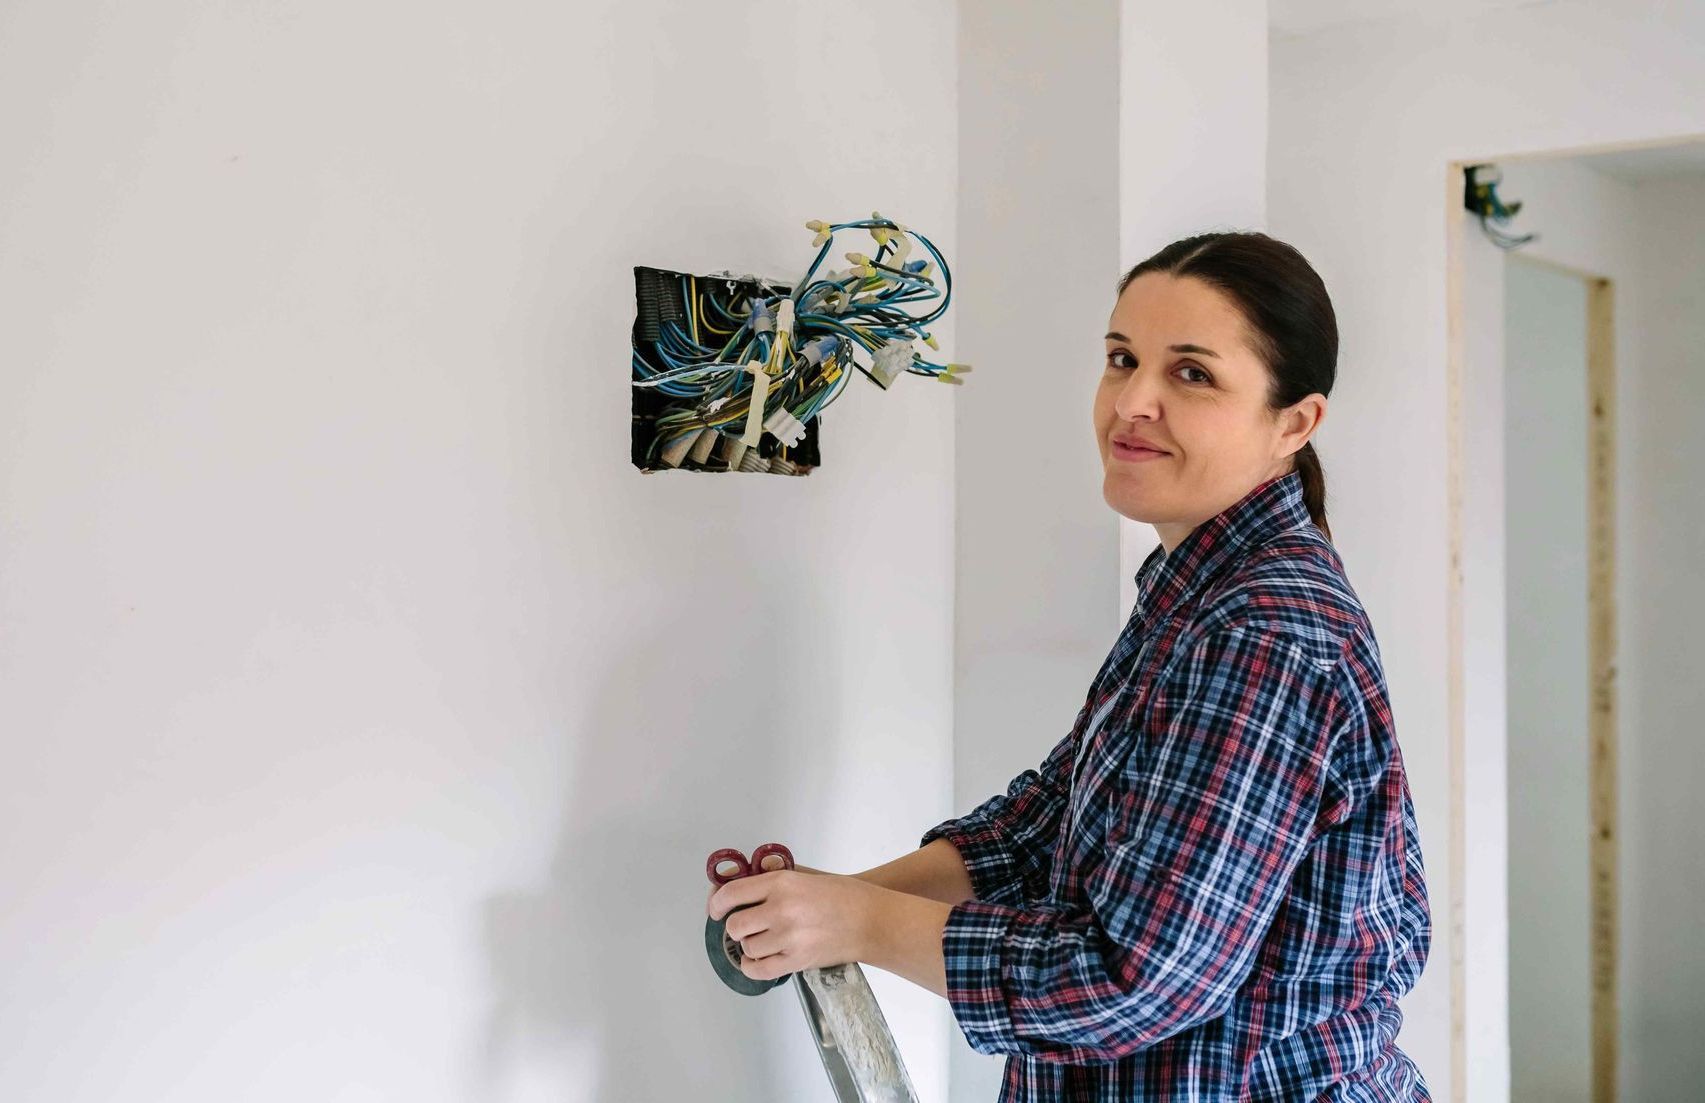 Electrician Rewiring Home Electrical System Inside House